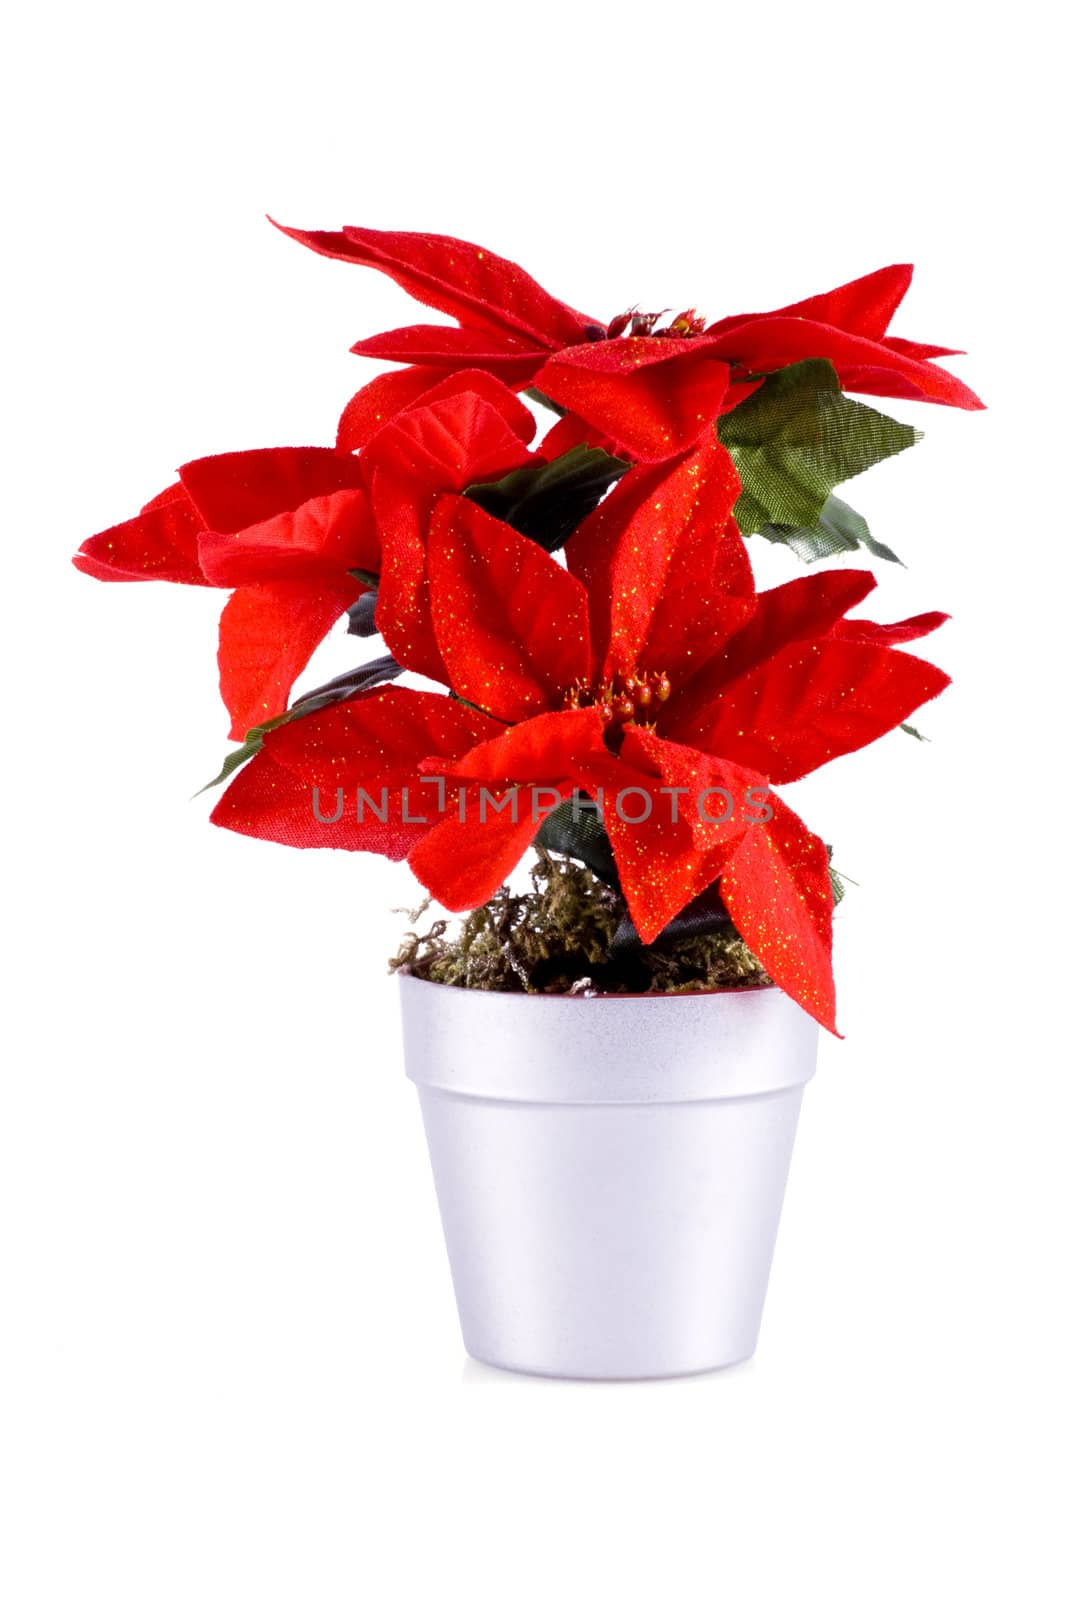 Red poinsettia, isolated on a white background.